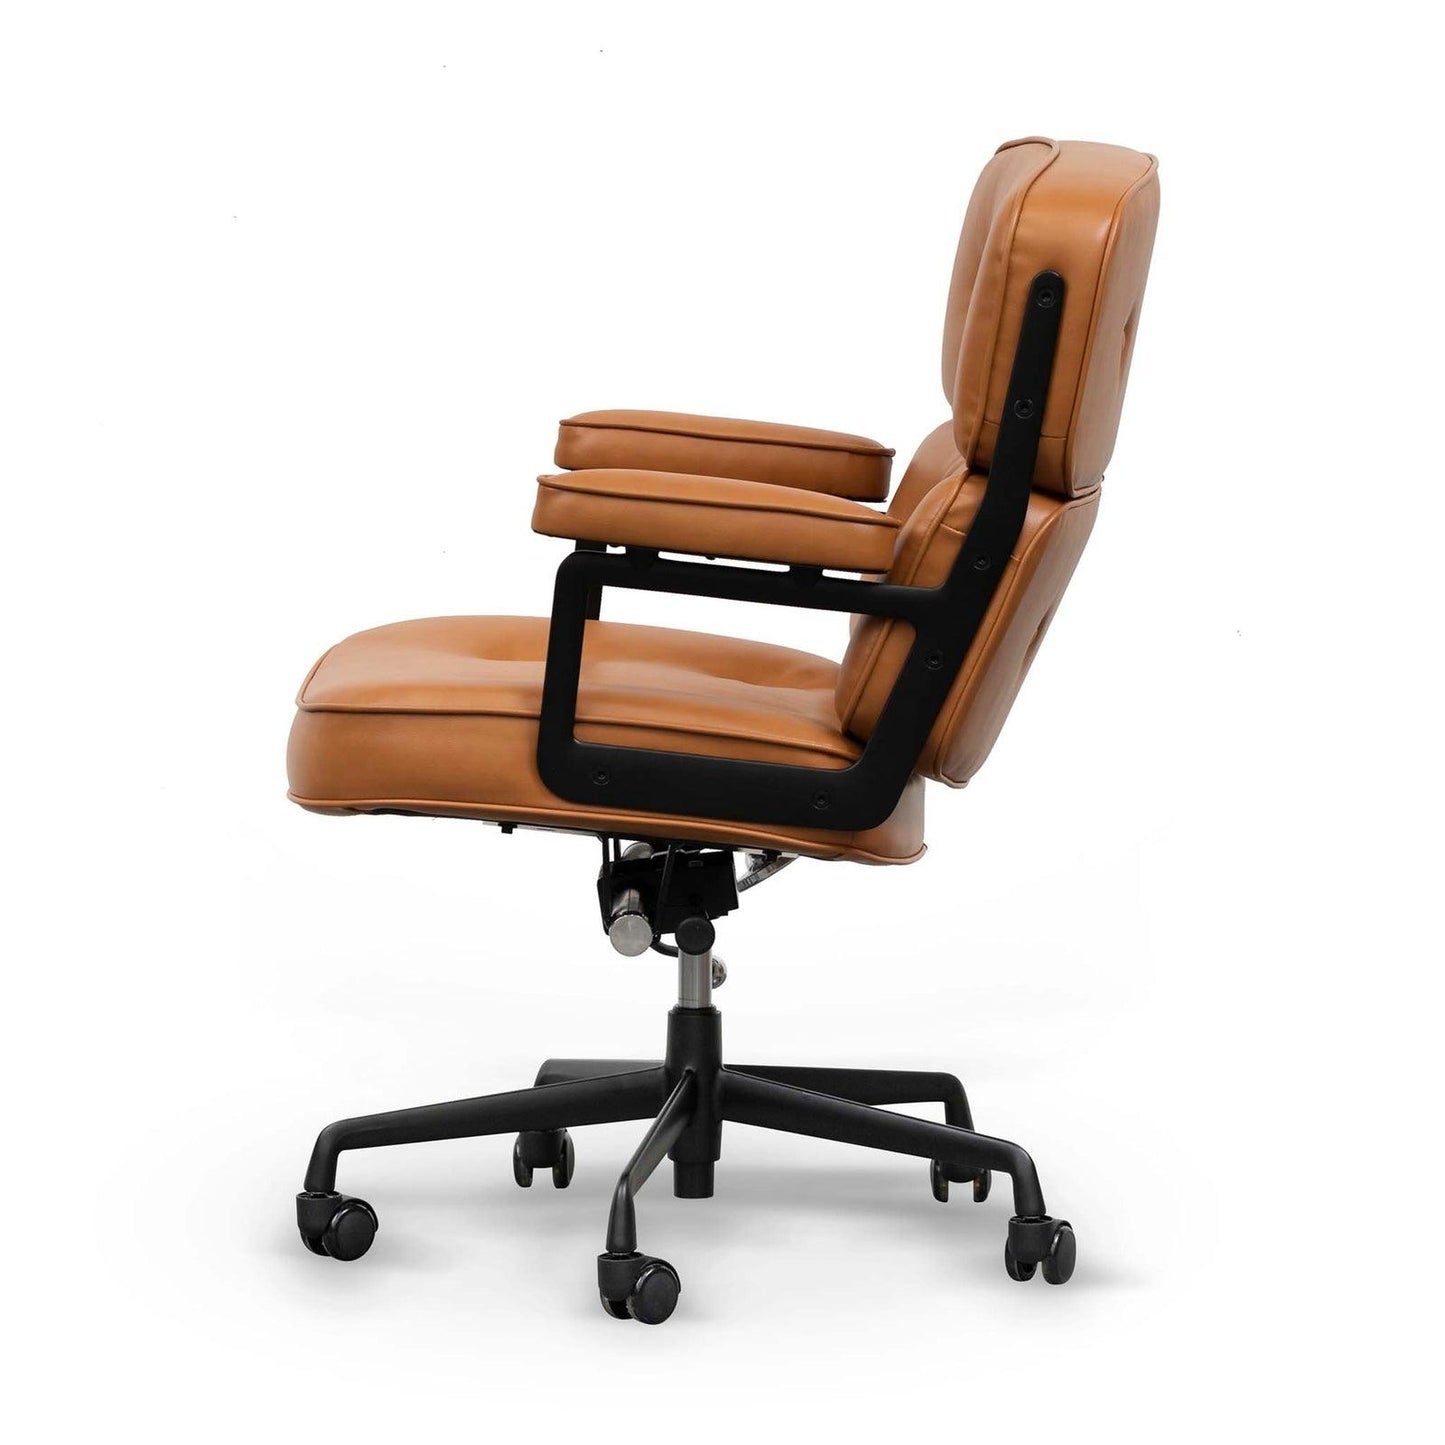 Office Chair - Honey Tan - Office/Gaming ChairsOC8206-YS 3